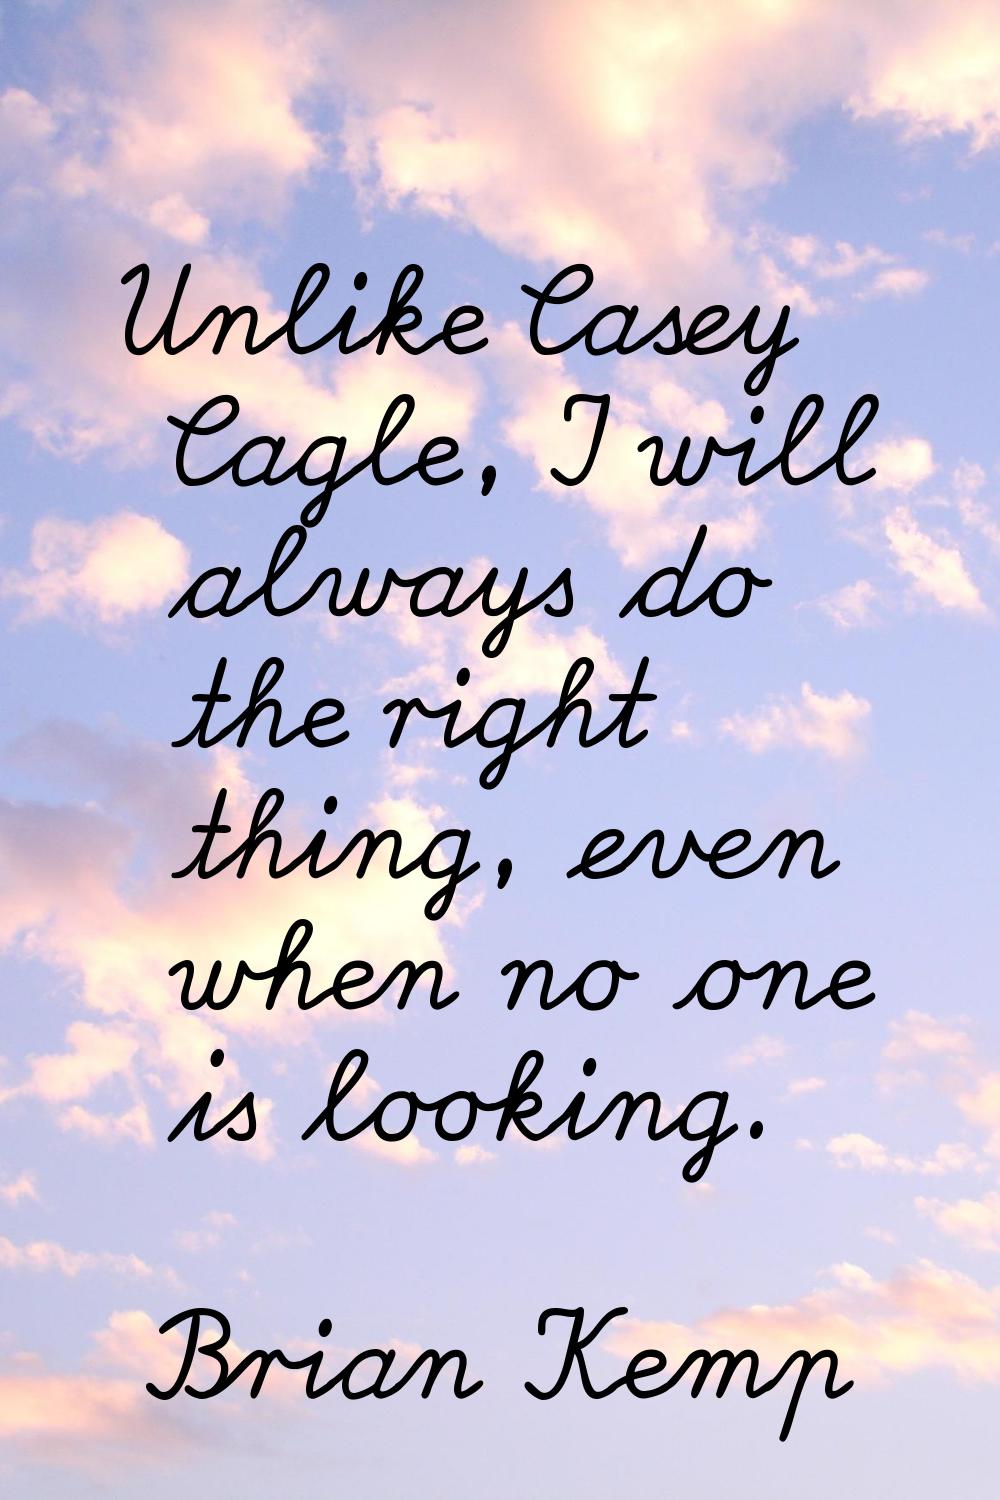 Unlike Casey Cagle, I will always do the right thing, even when no one is looking.